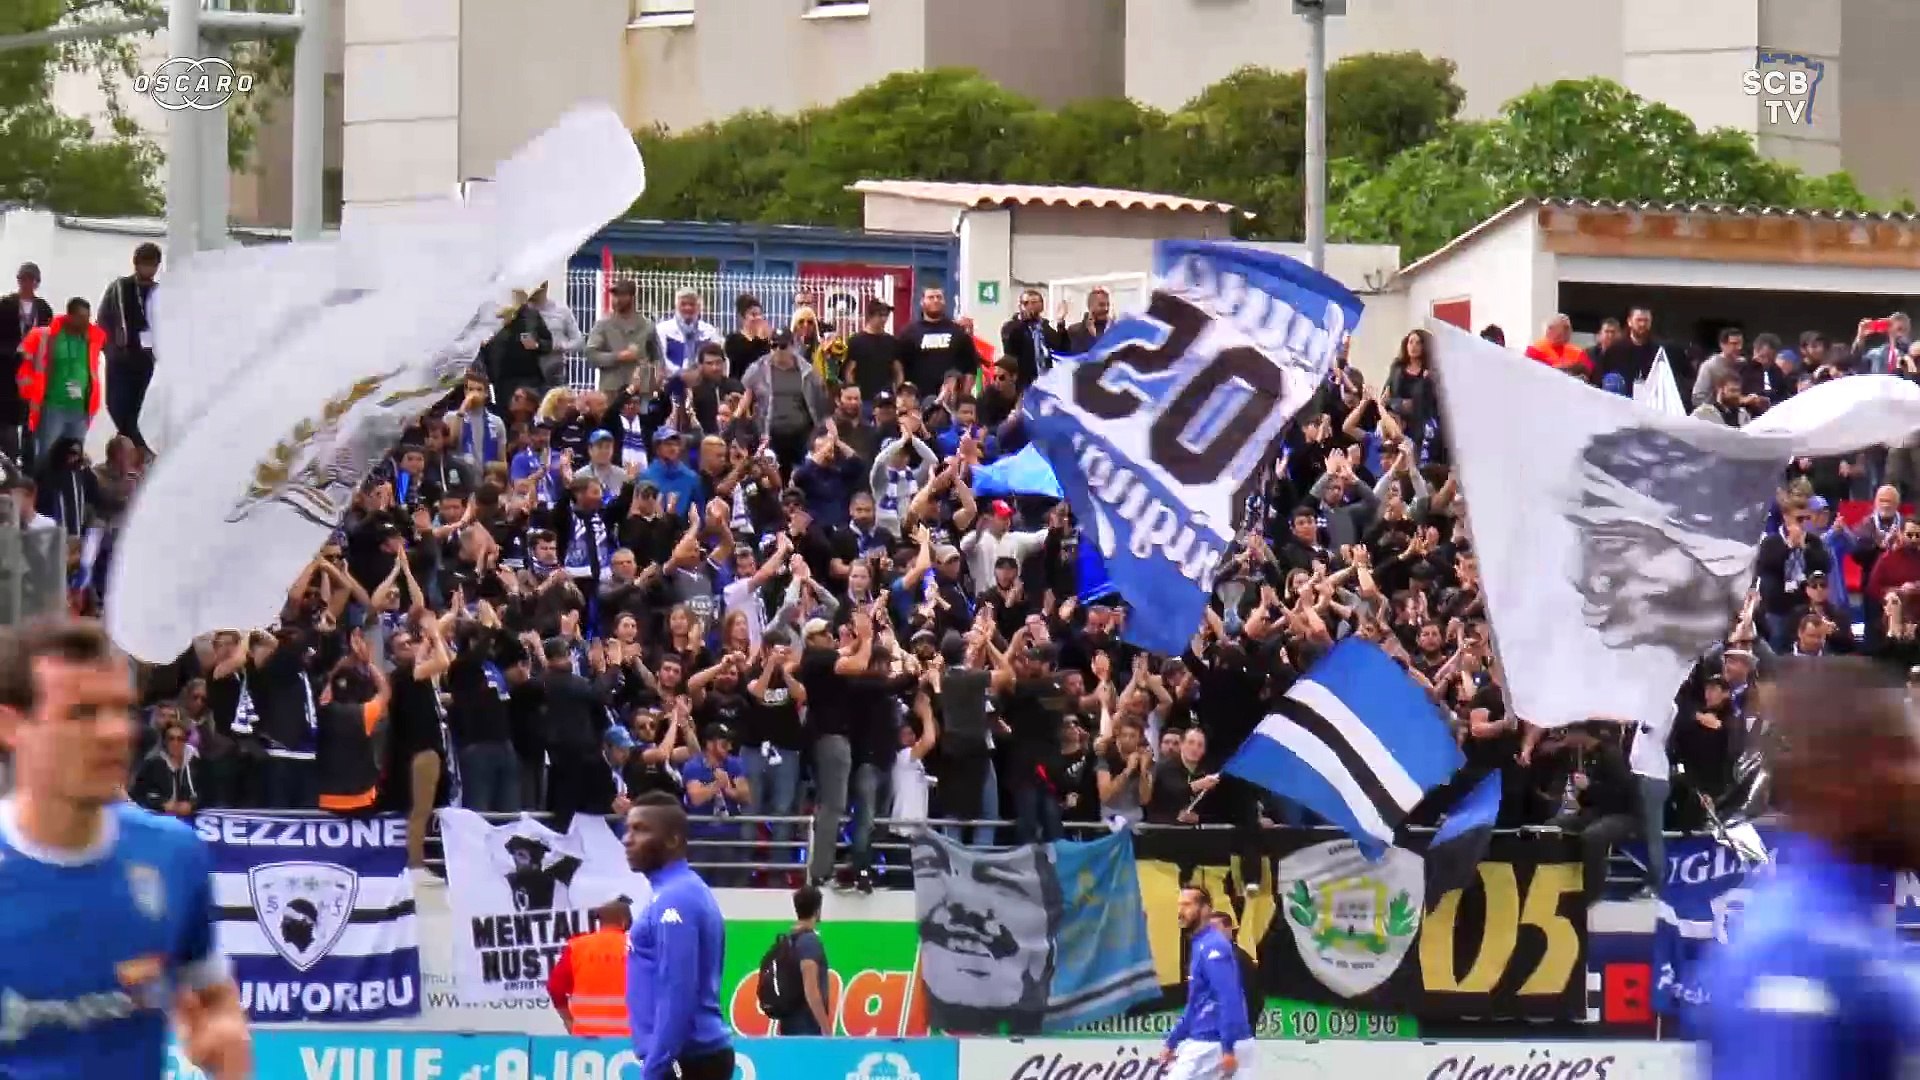 GFCA-SCB : l'inside supporters - Vidéo Dailymotion